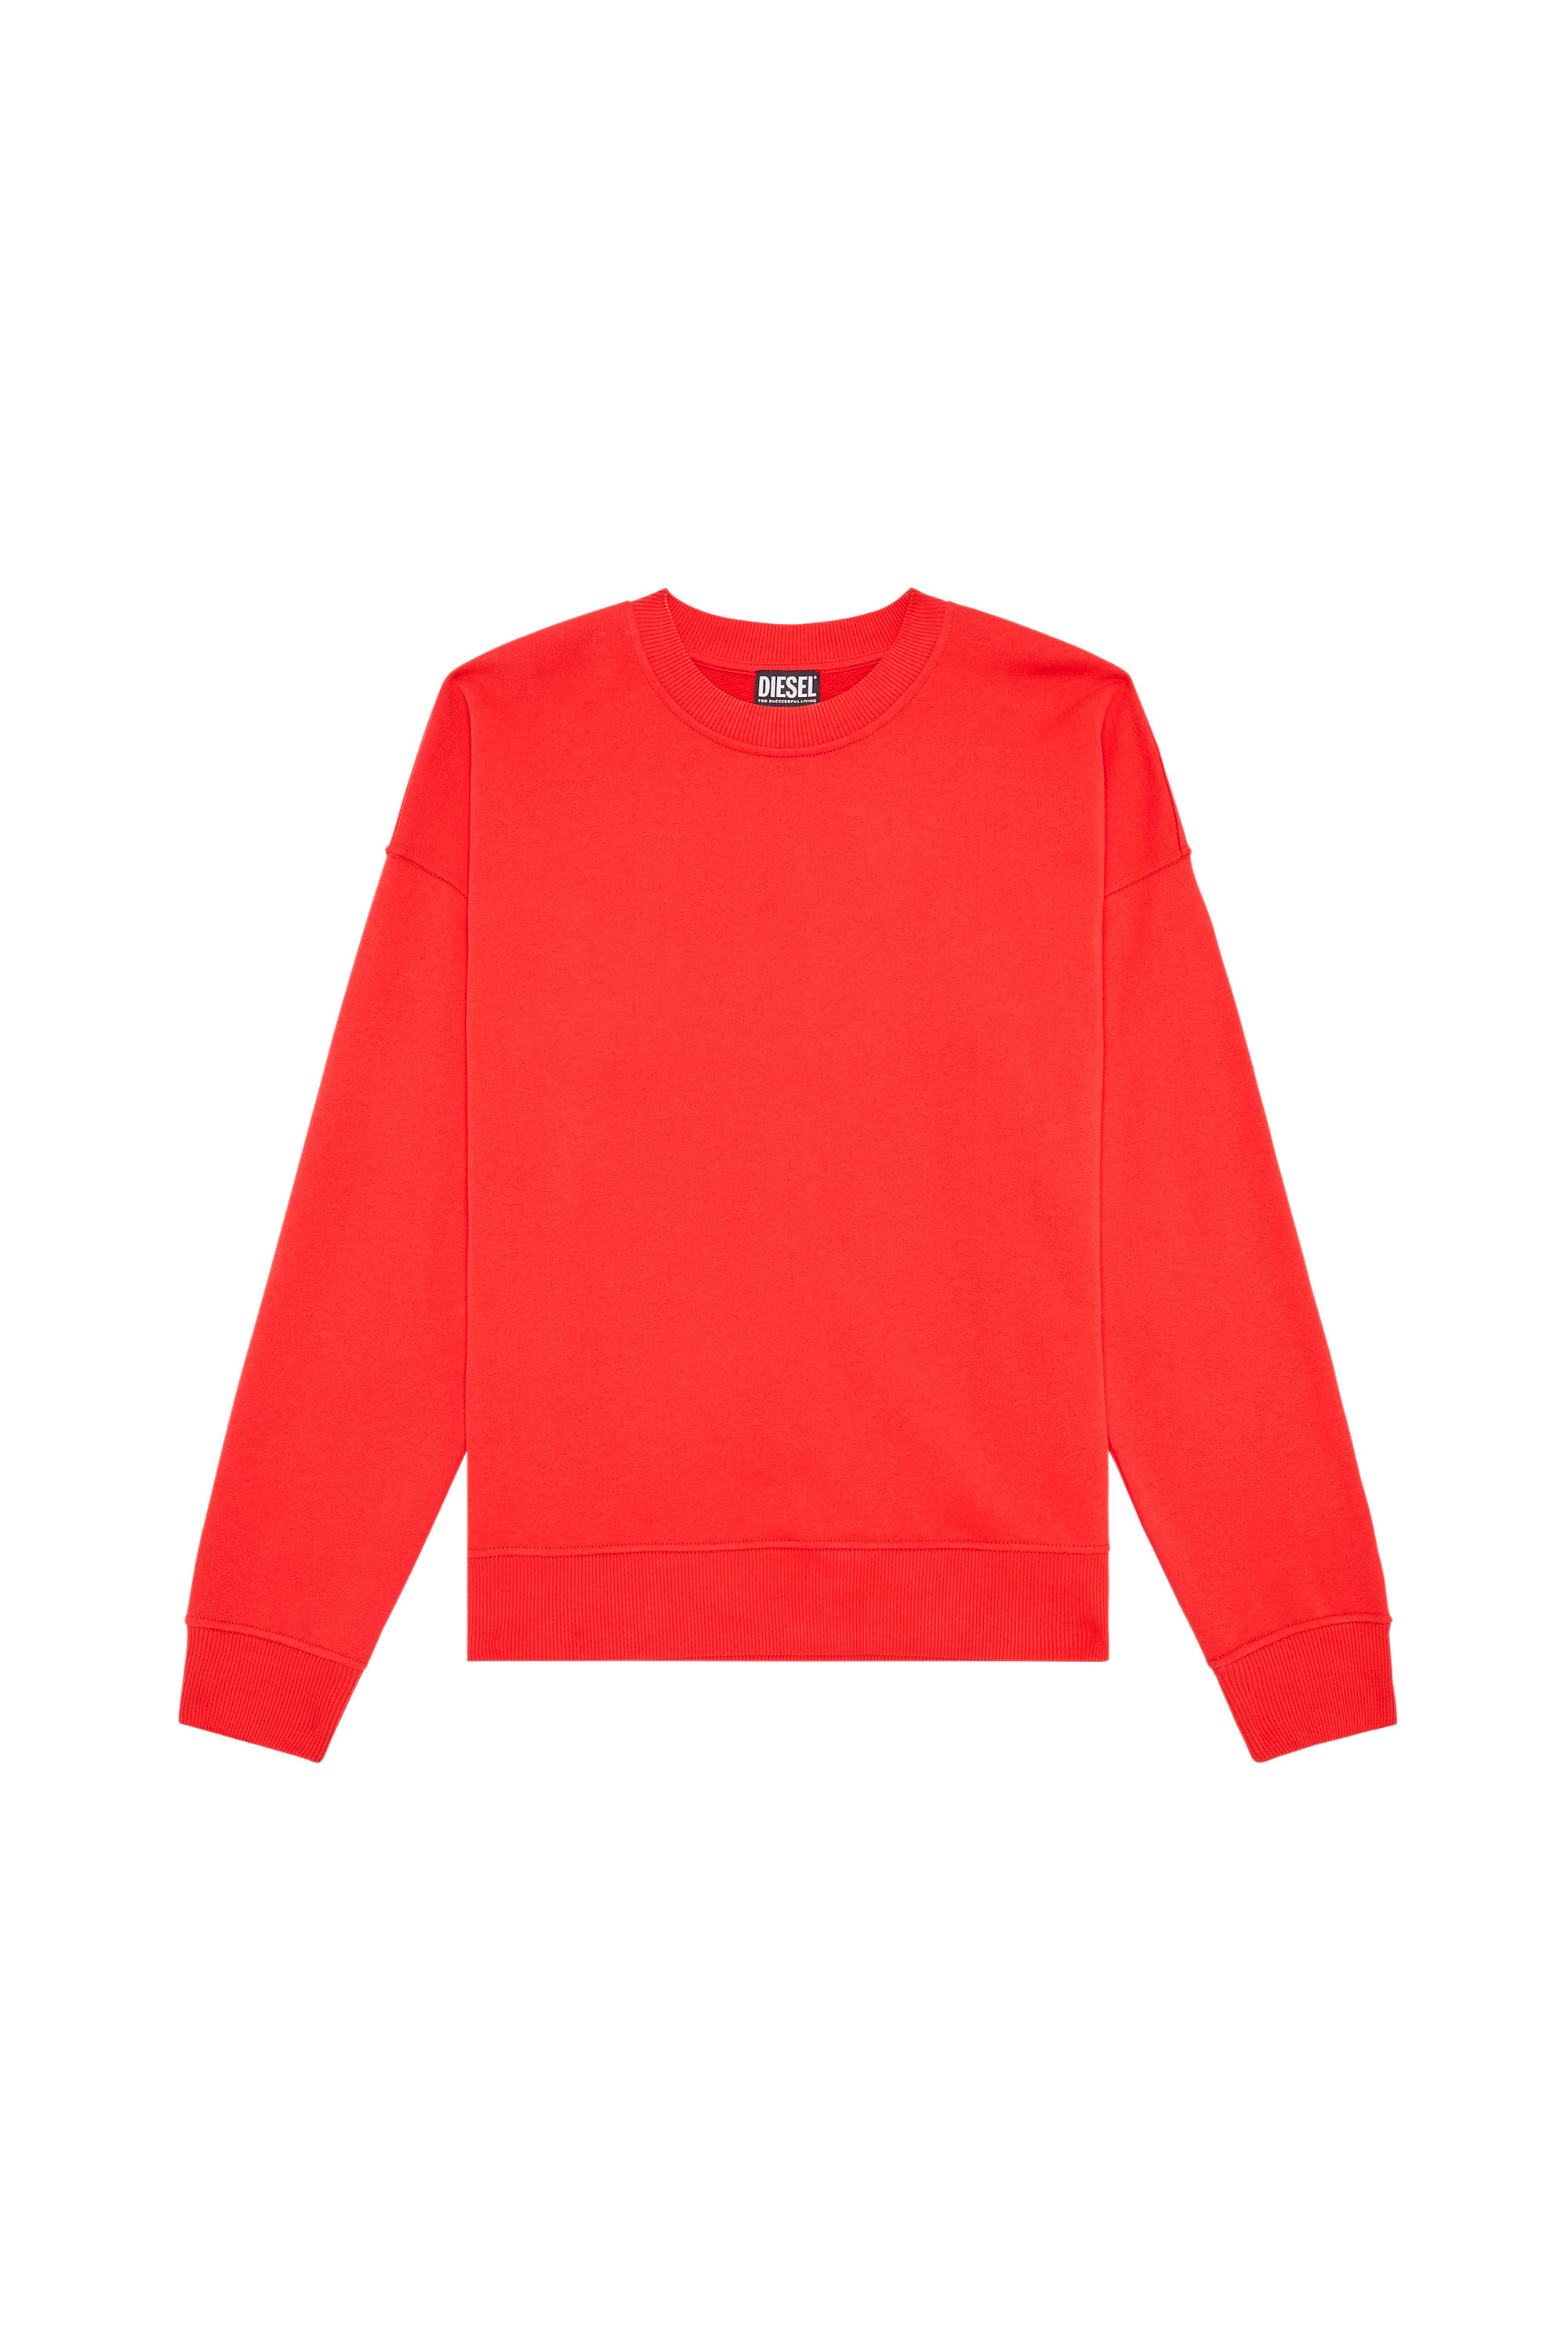 Diesel - S-ROB-MEGOVAL, Man Sweatshirt with back maxi D logo in Red - Image 5